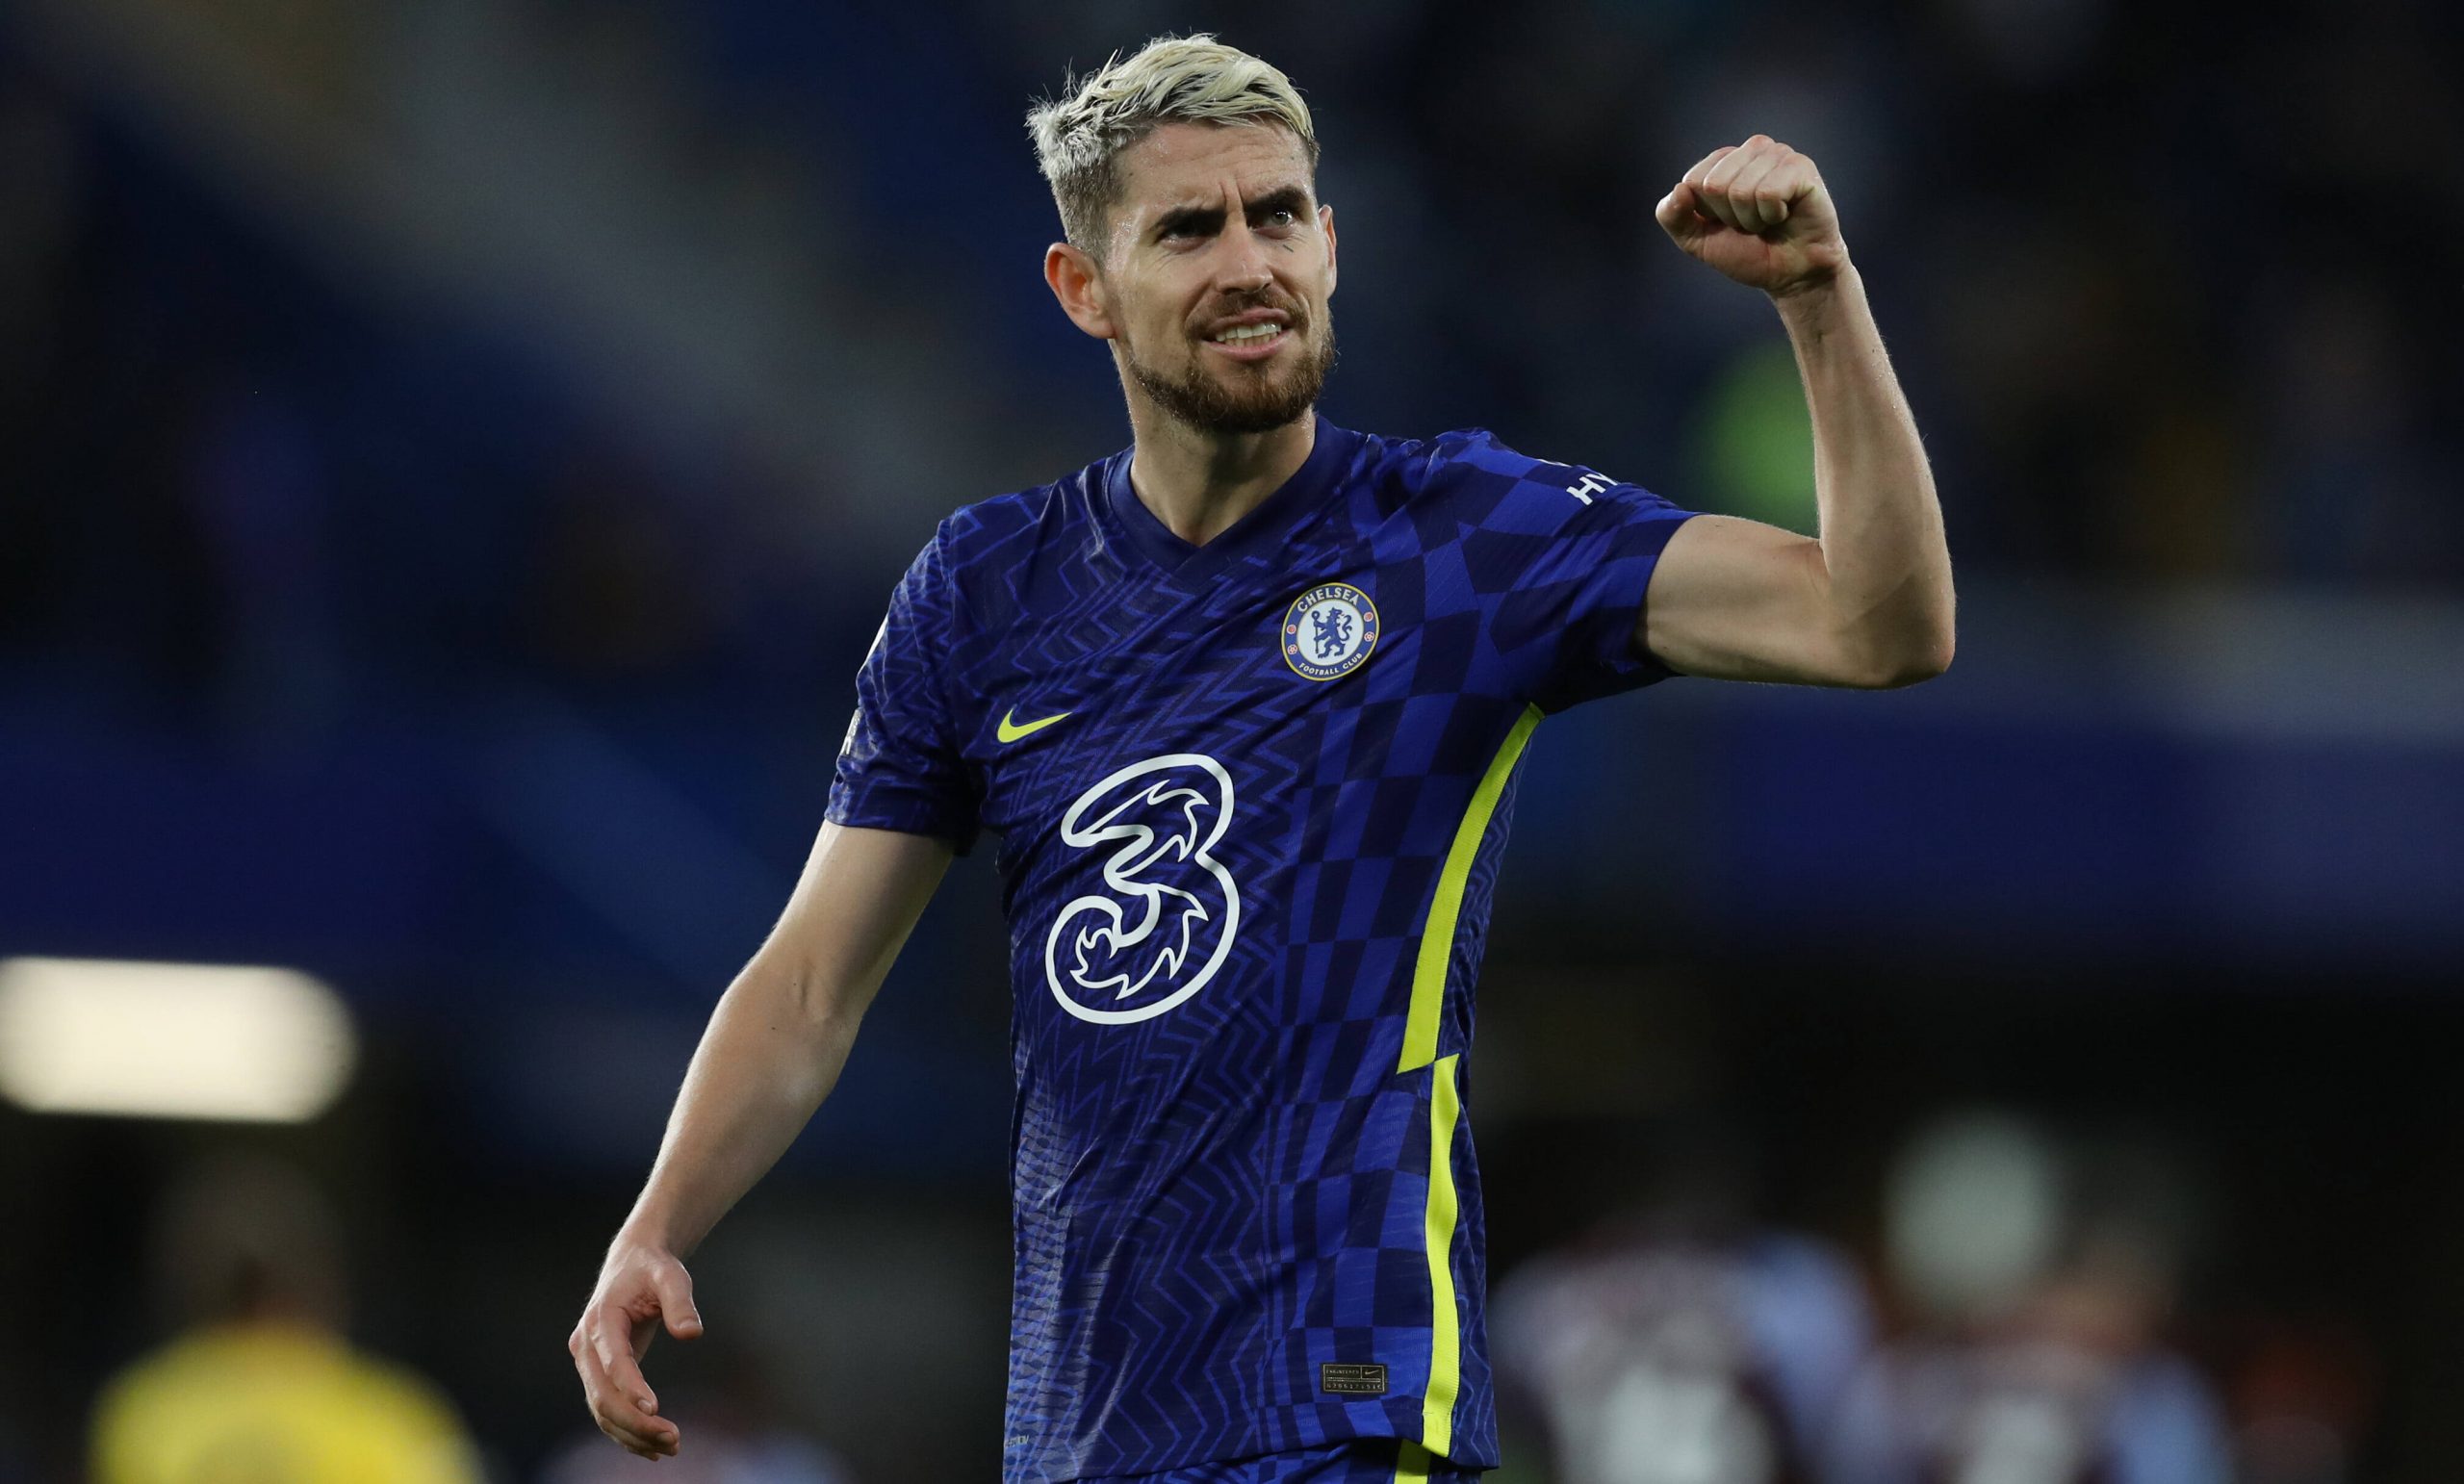 London, England, 11th September 2021. Jorginho of Chelsea celebrates after his team win during the Premier League match